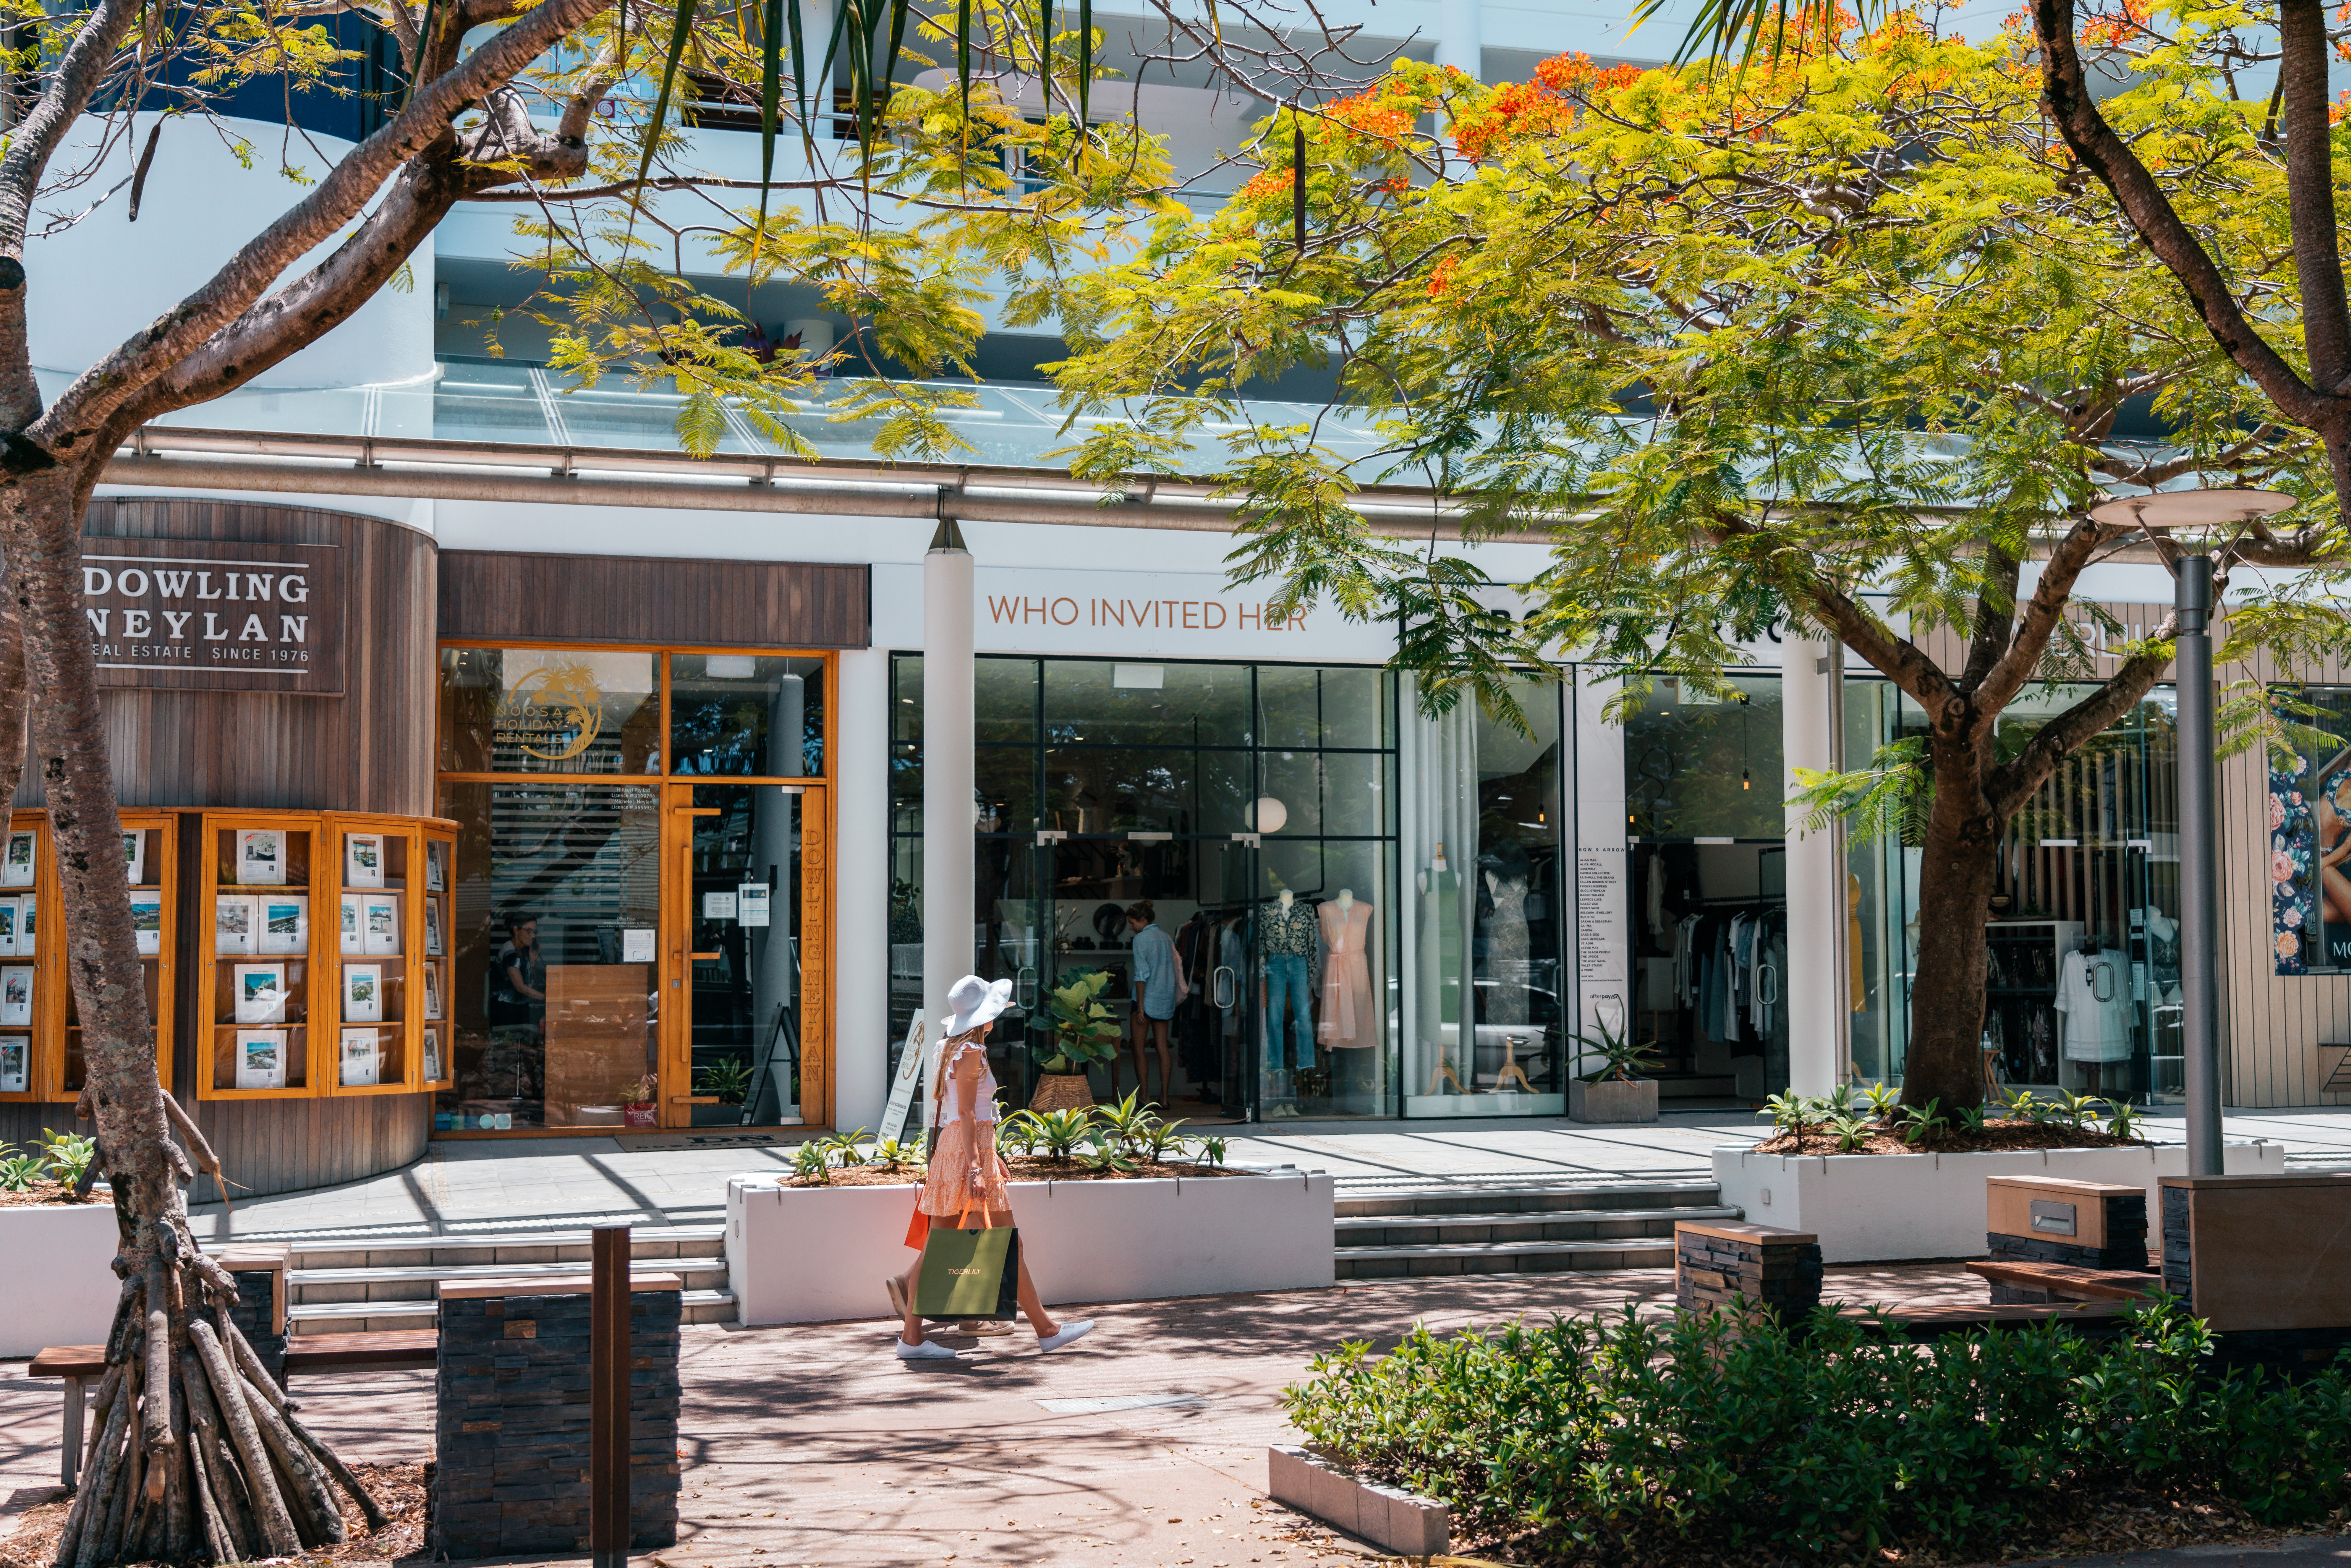 Shopping along the iconic street in Noosa